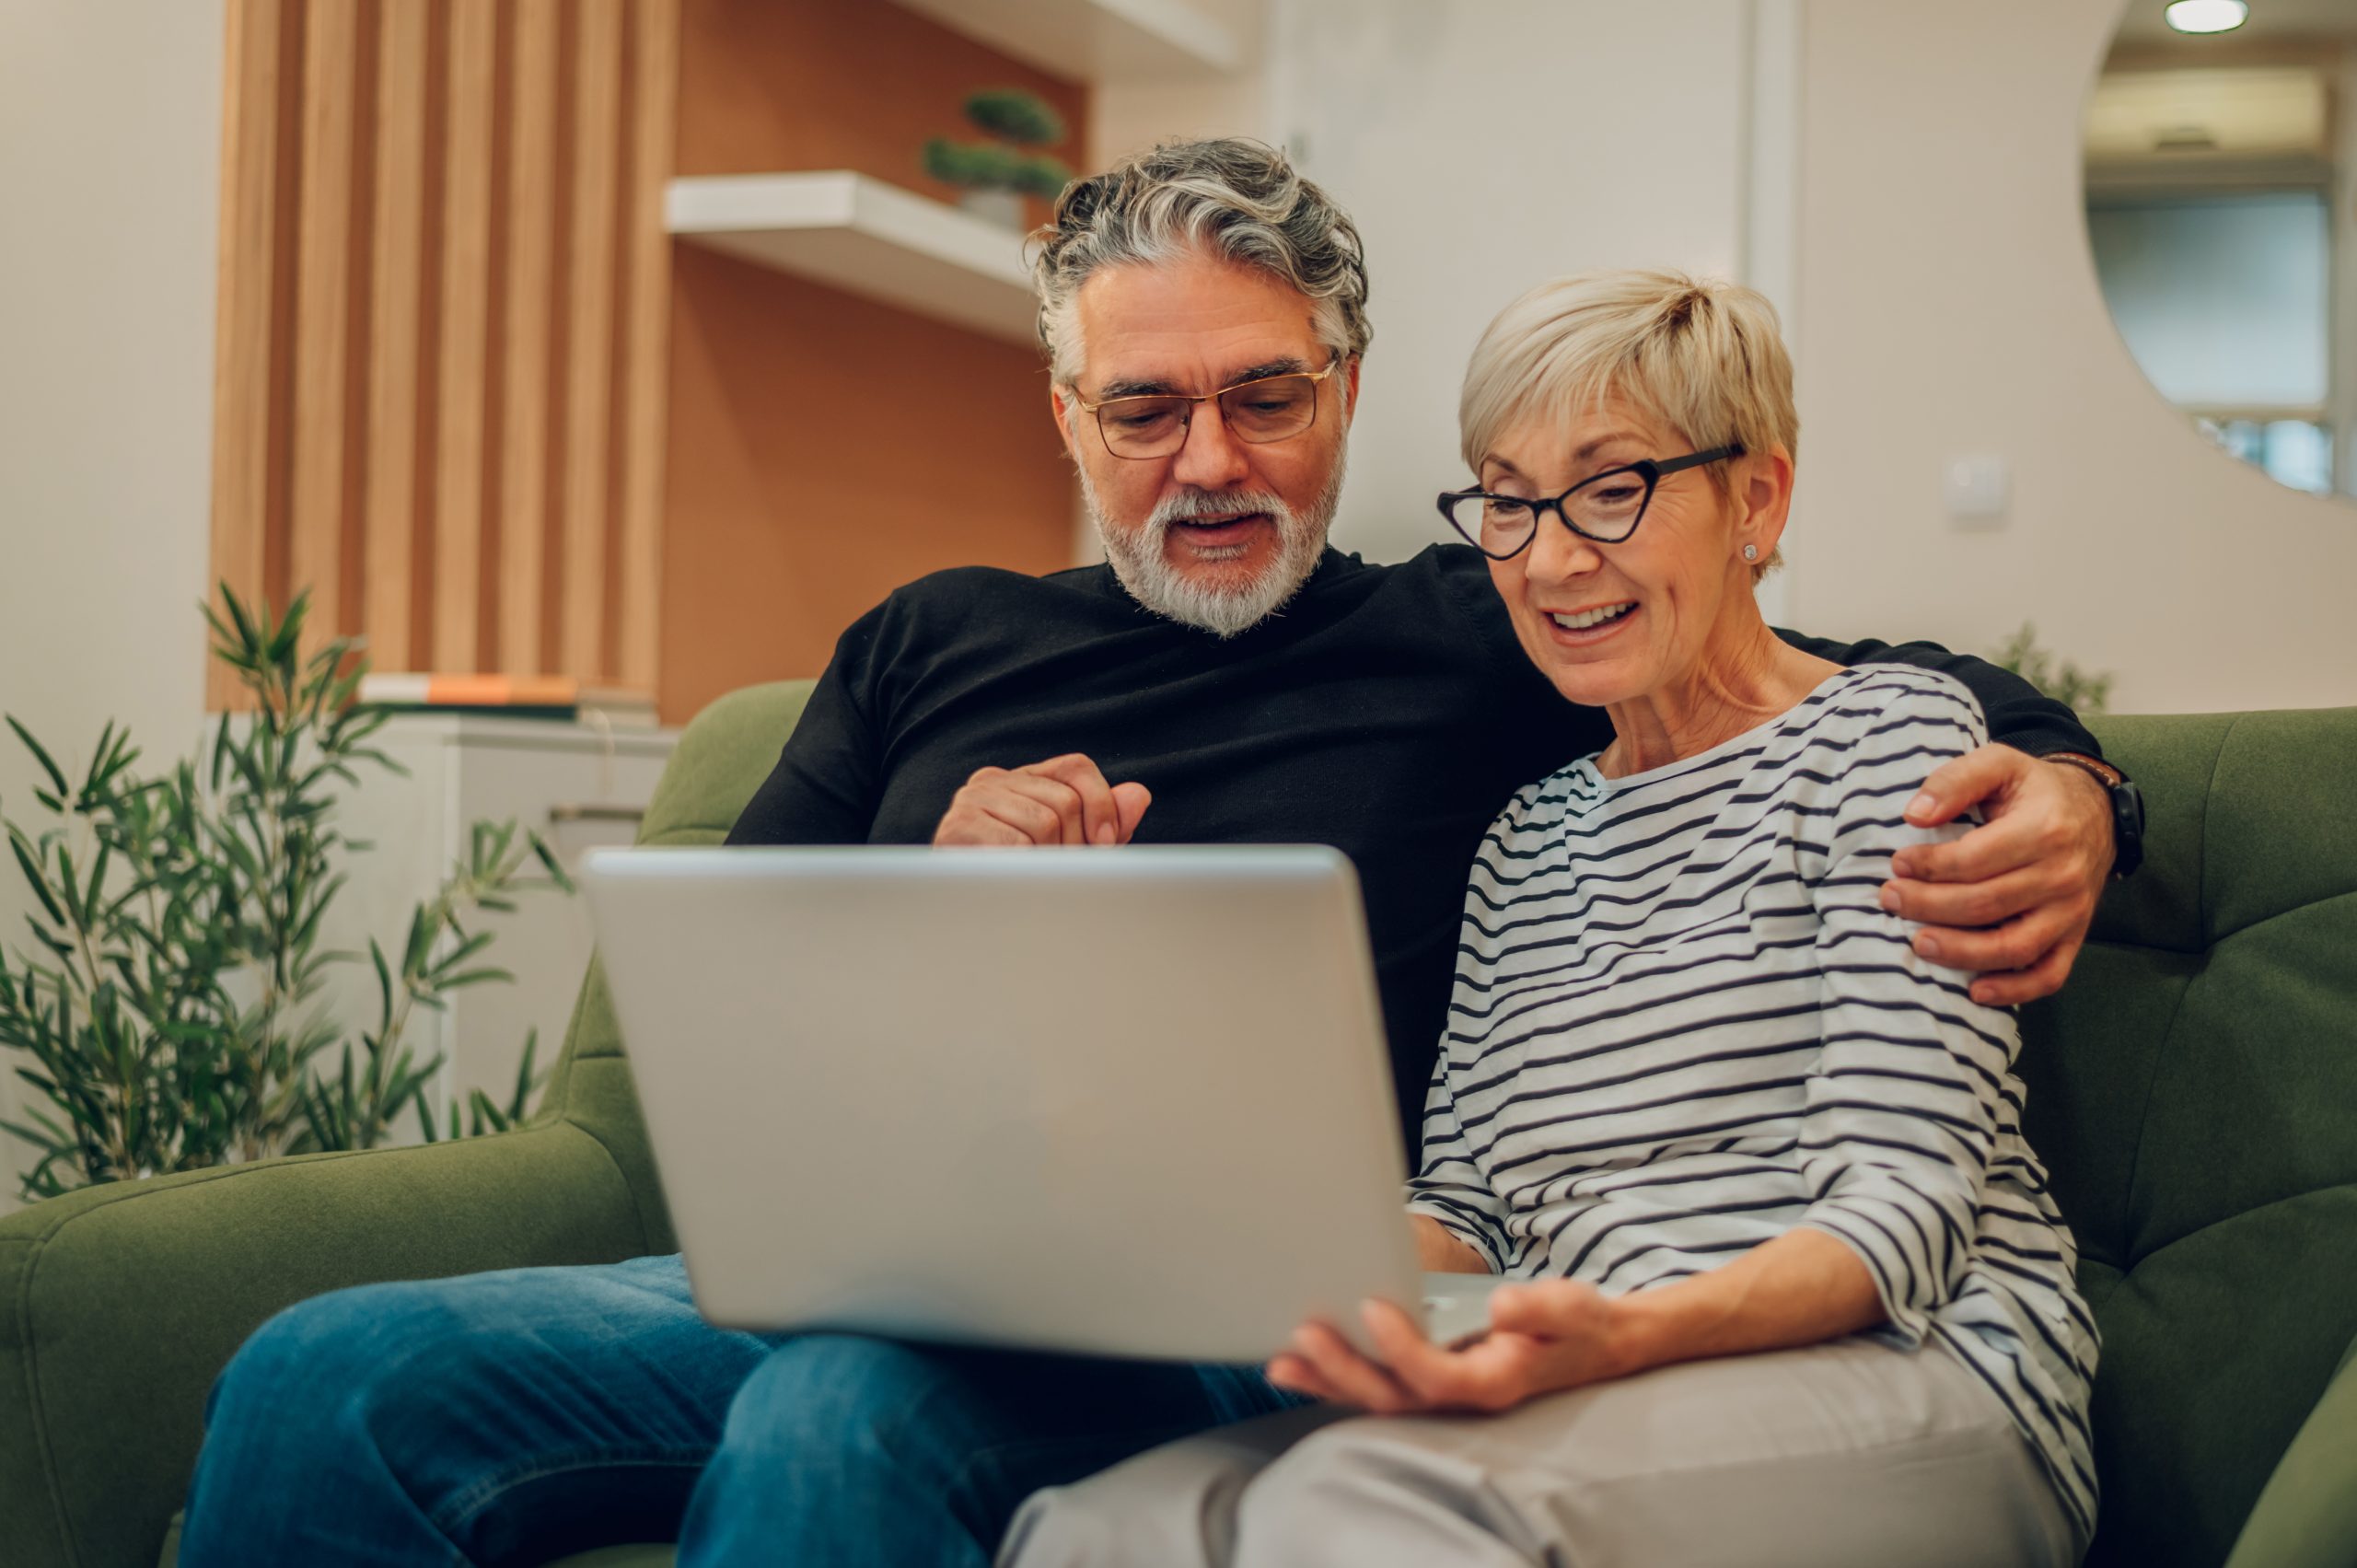 a man and woman sit on a couch looking at a laptop about reverse mortgage